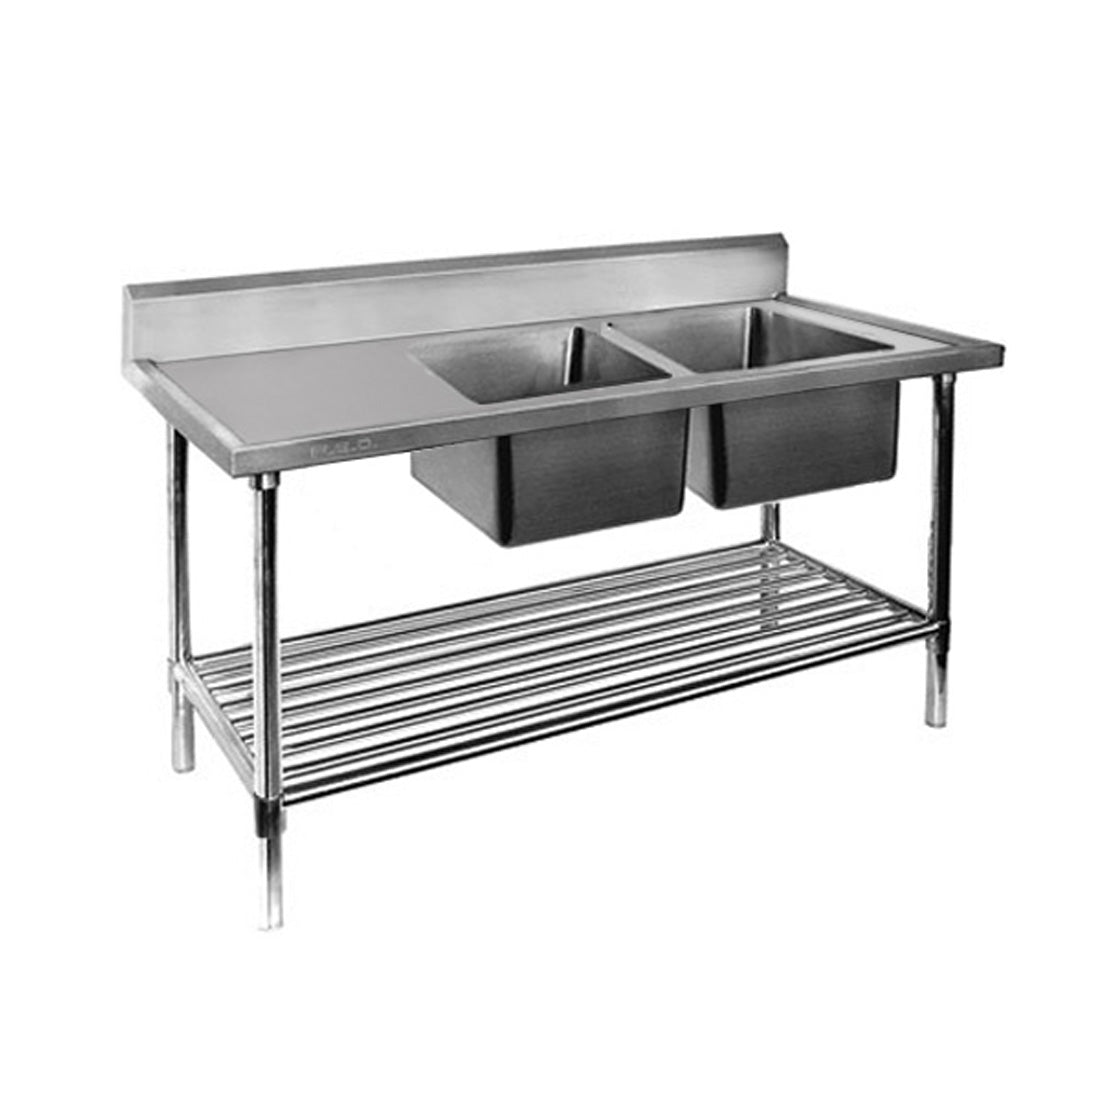 Modular Systems Double Right Sink Bench with Pot Undershelf 2100x700x900 DSB7-2100R/A